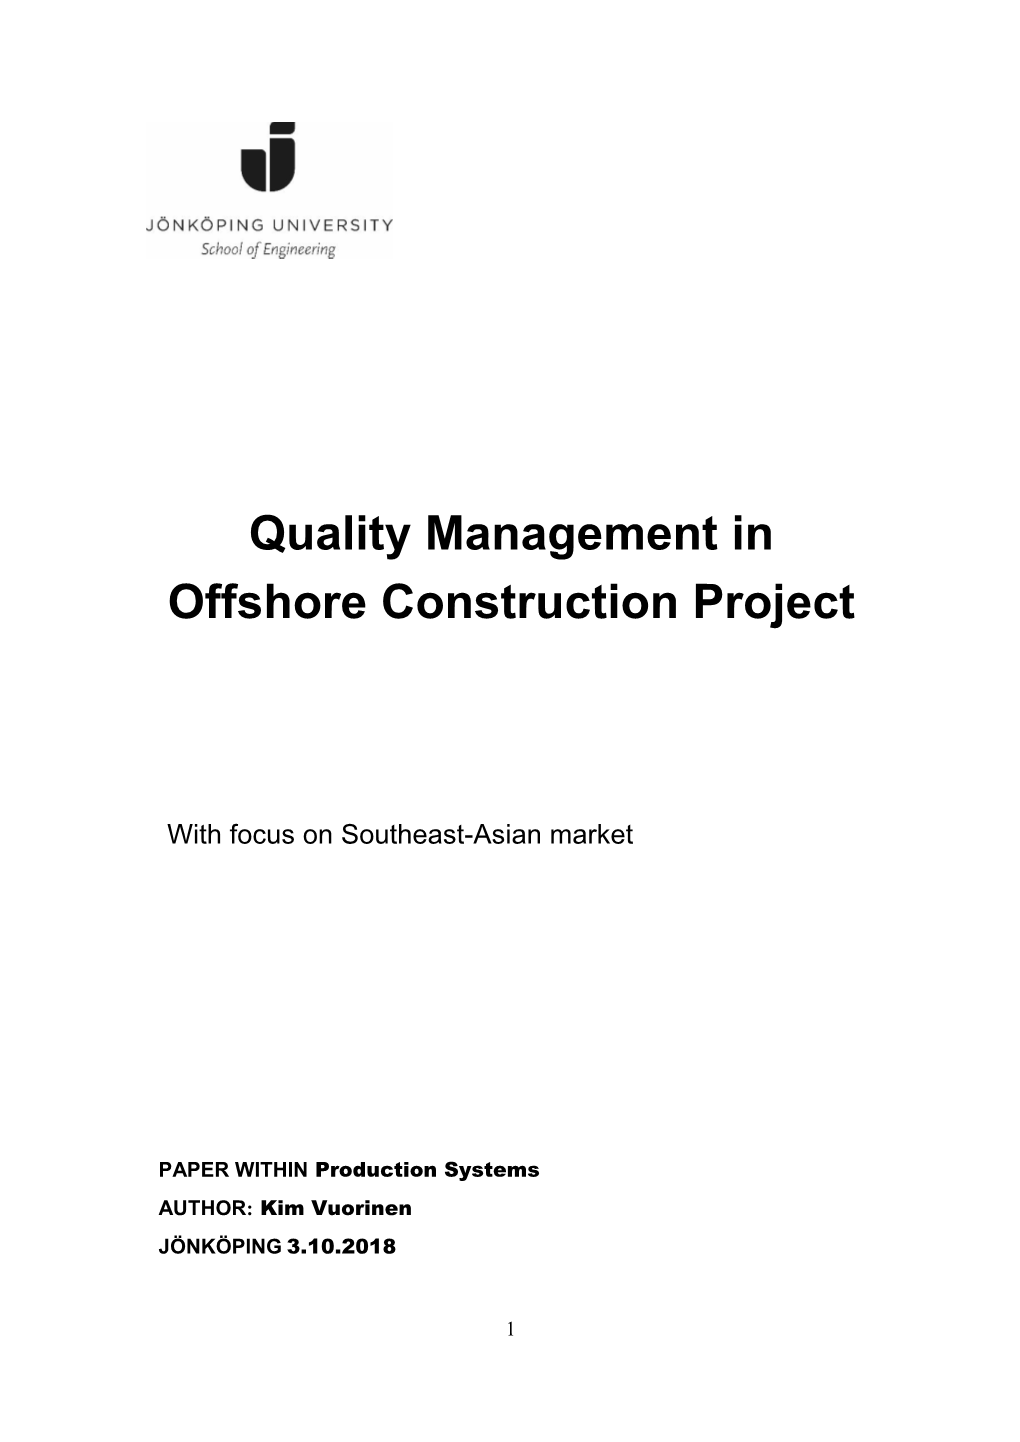 Quality Management in Offshore Construction Project